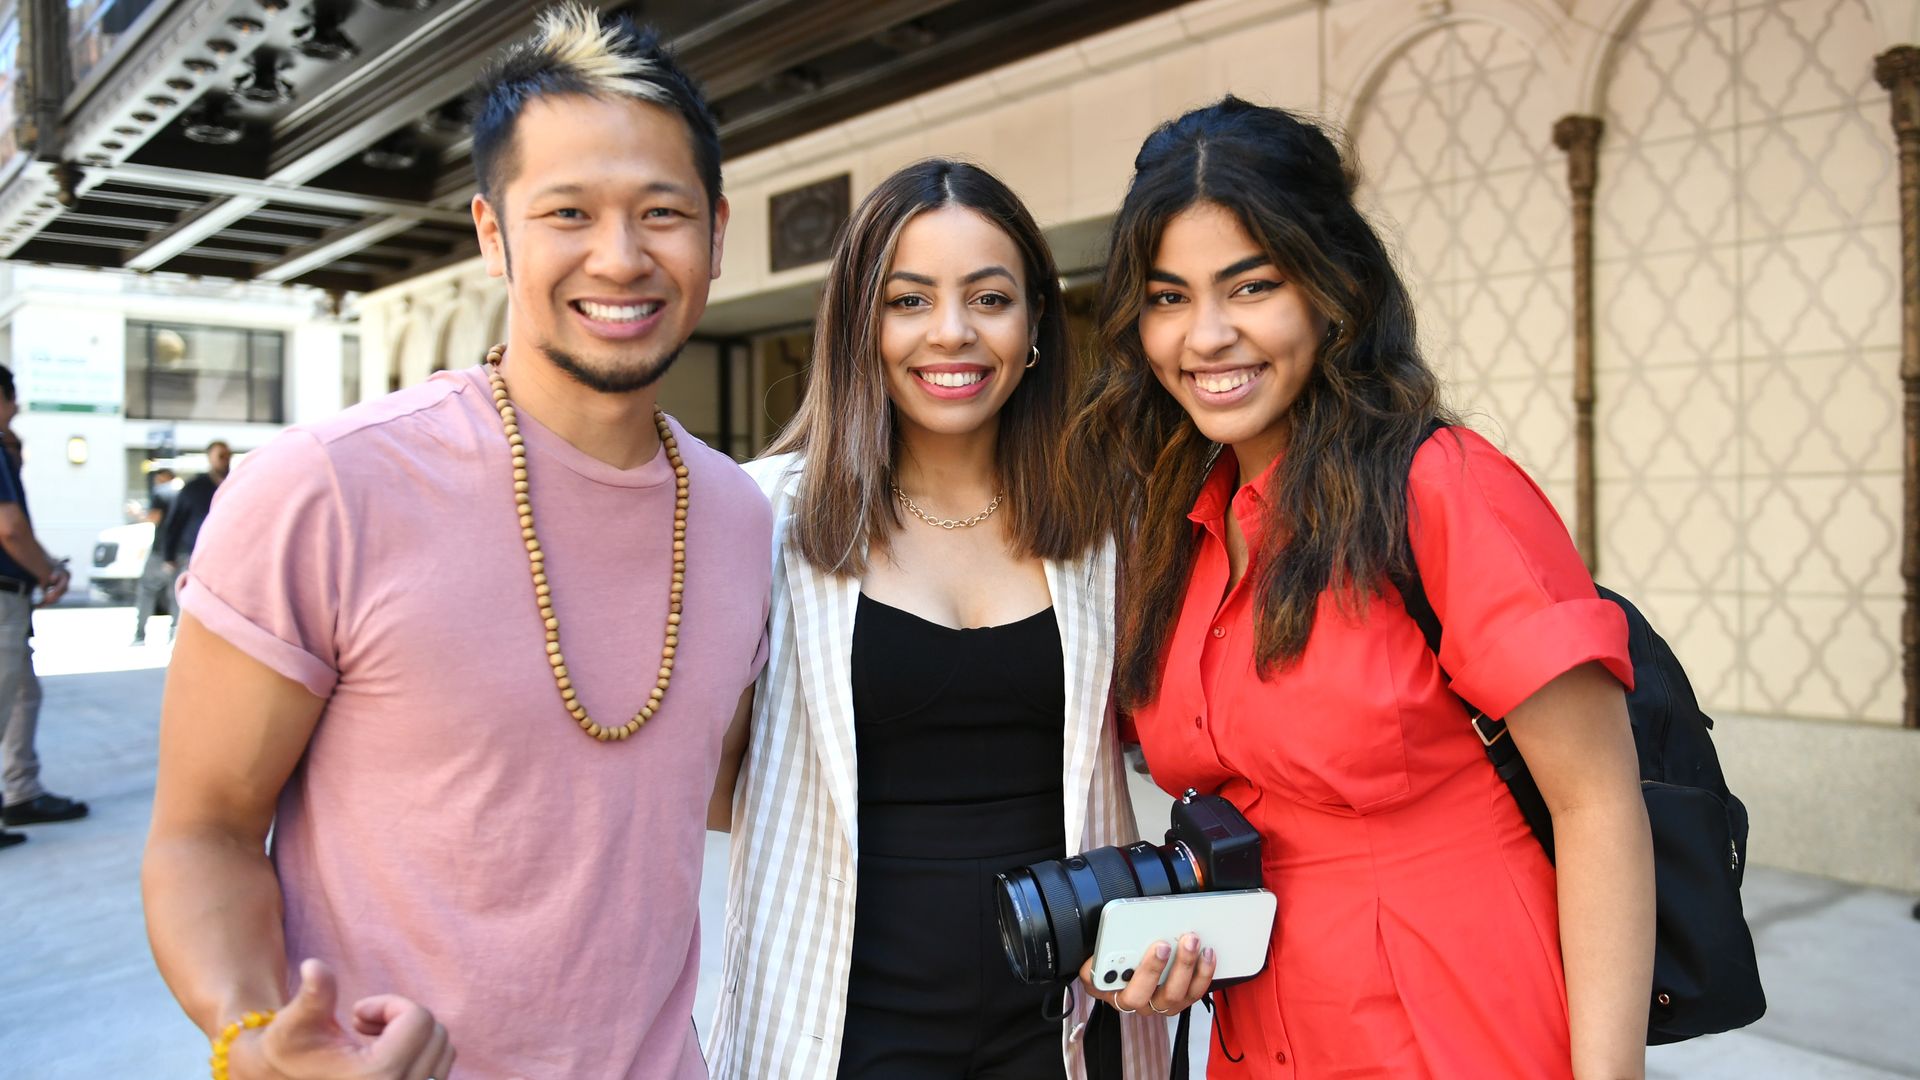 Brian Tong, Krystal Lora, and Gabriel Lora attend the opening of the new Apple Tower Theater retail store in Downtown Los Angeles.